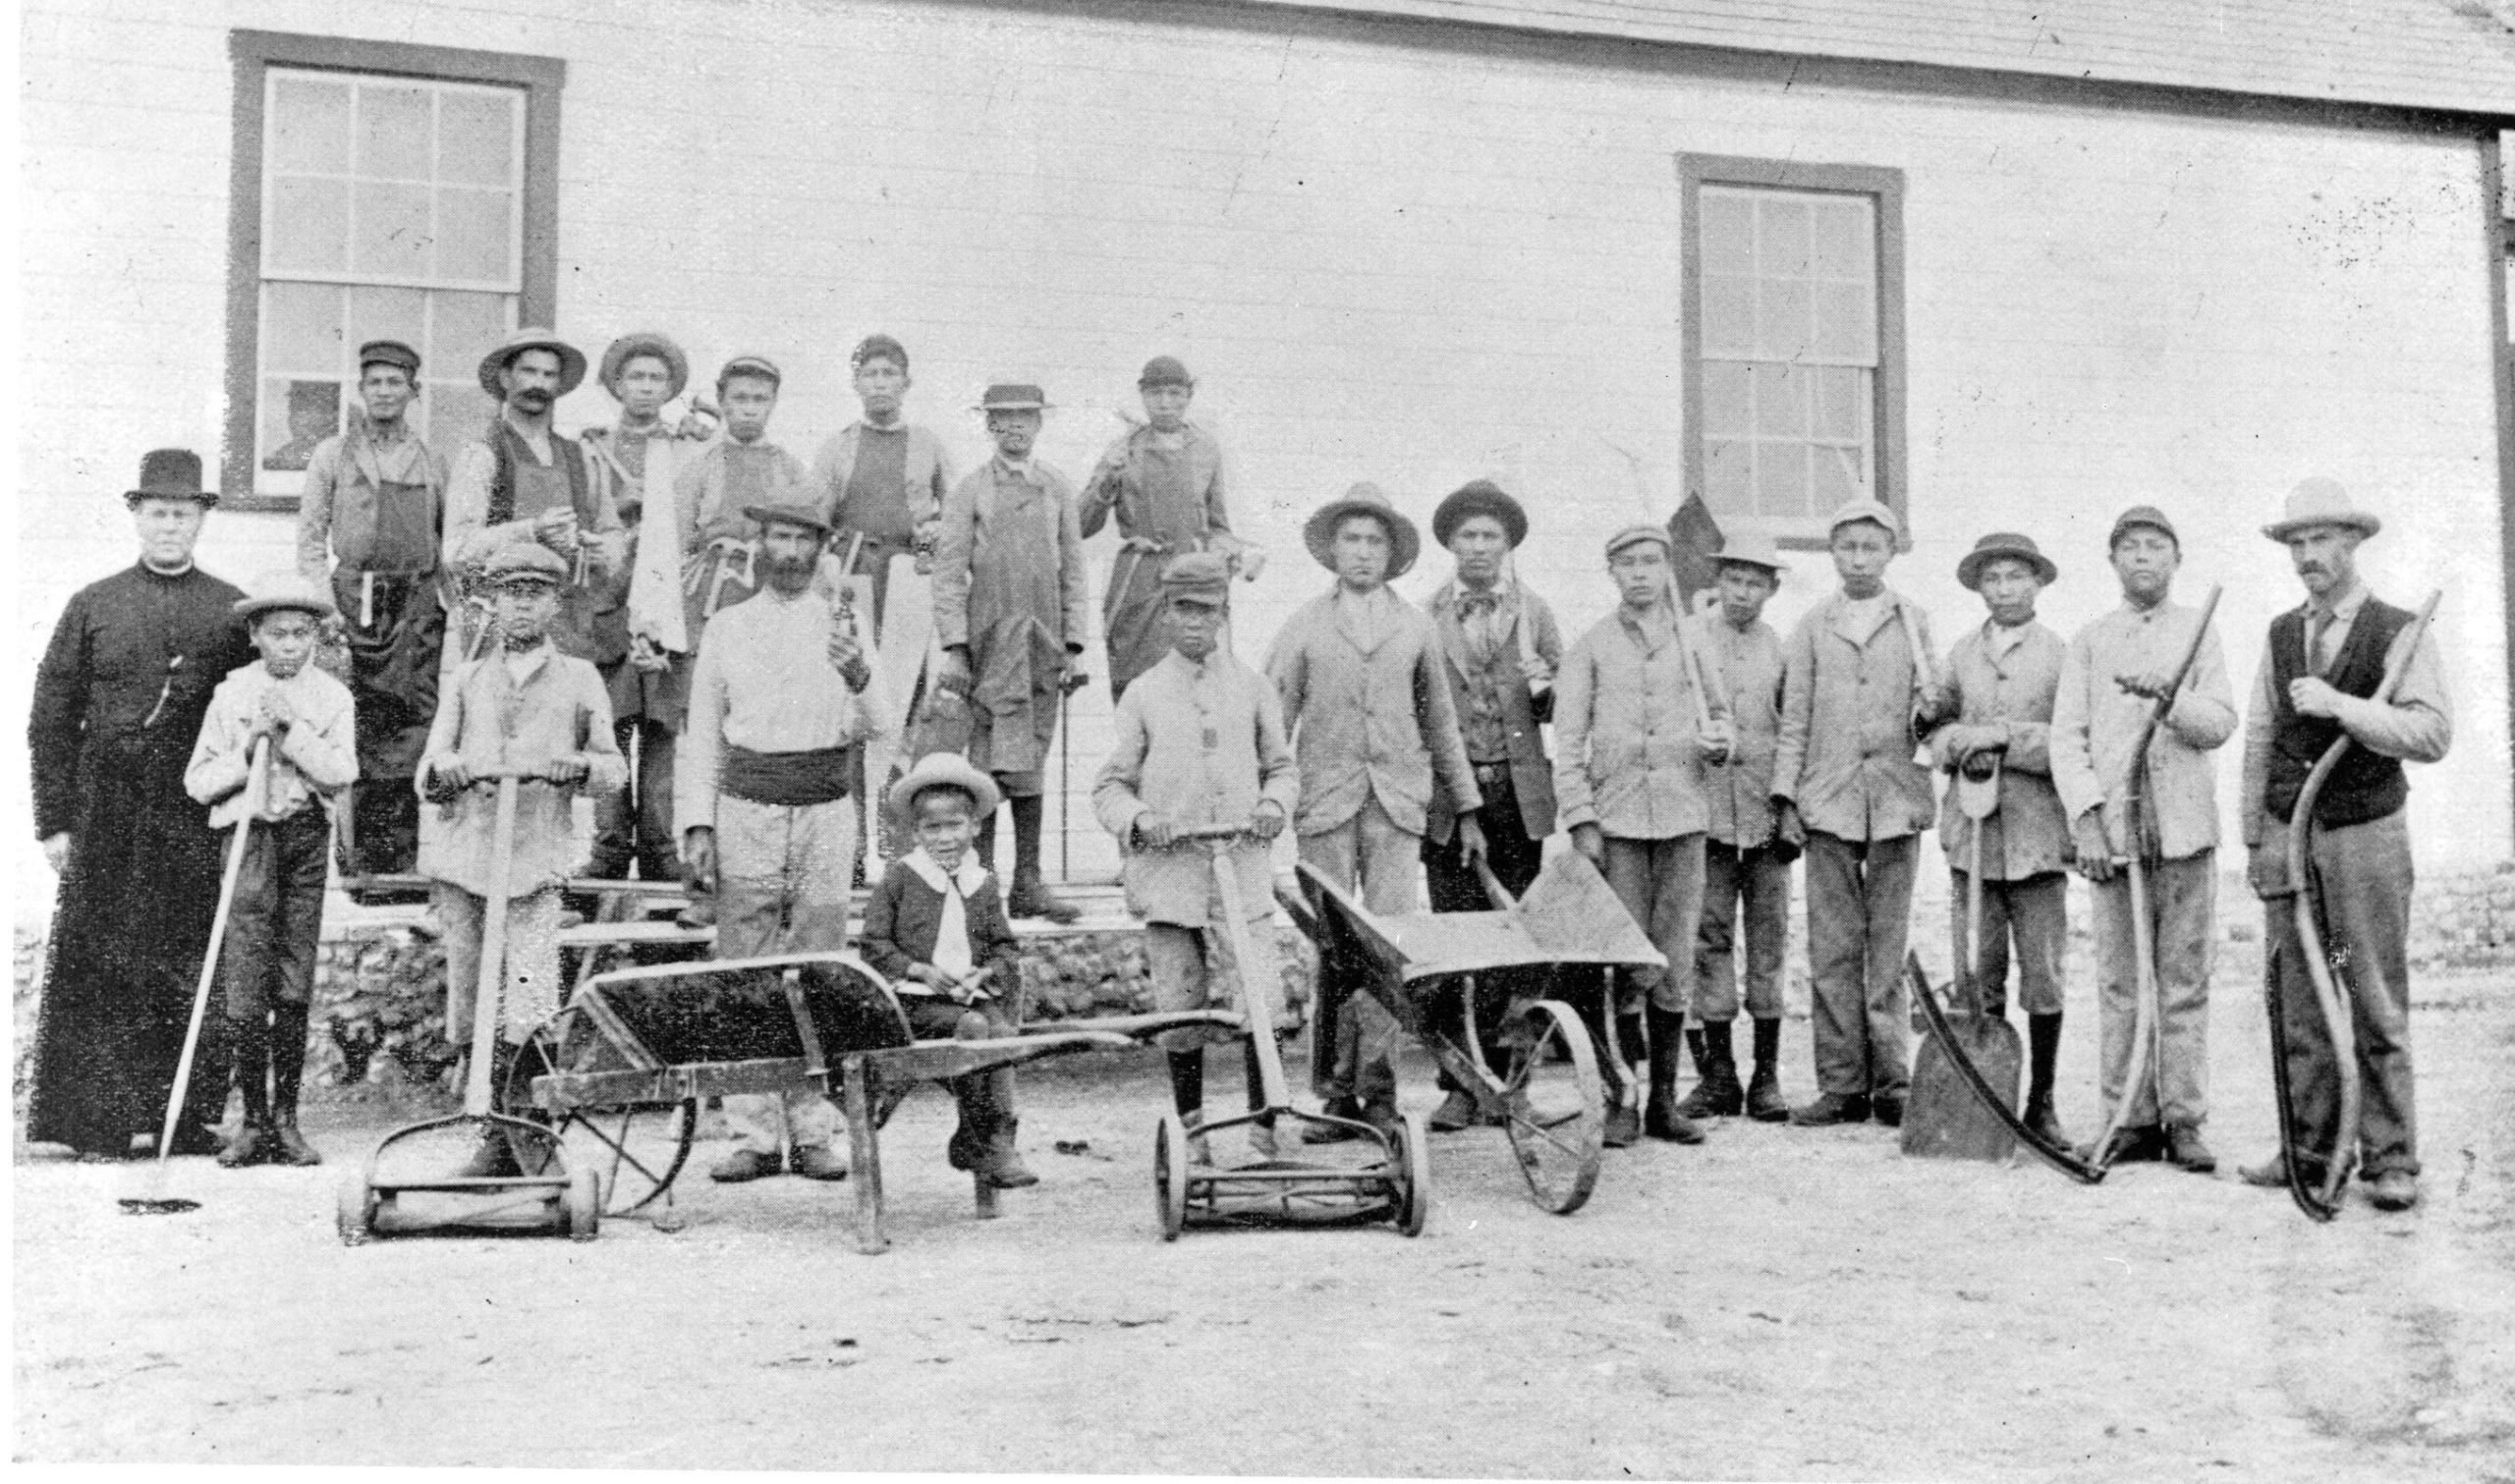 Black and white photograph of a couple dozen young people and adults standing in a group. Most are holding various hand tools, a few stand behind wheelbarrows or push-mowers.